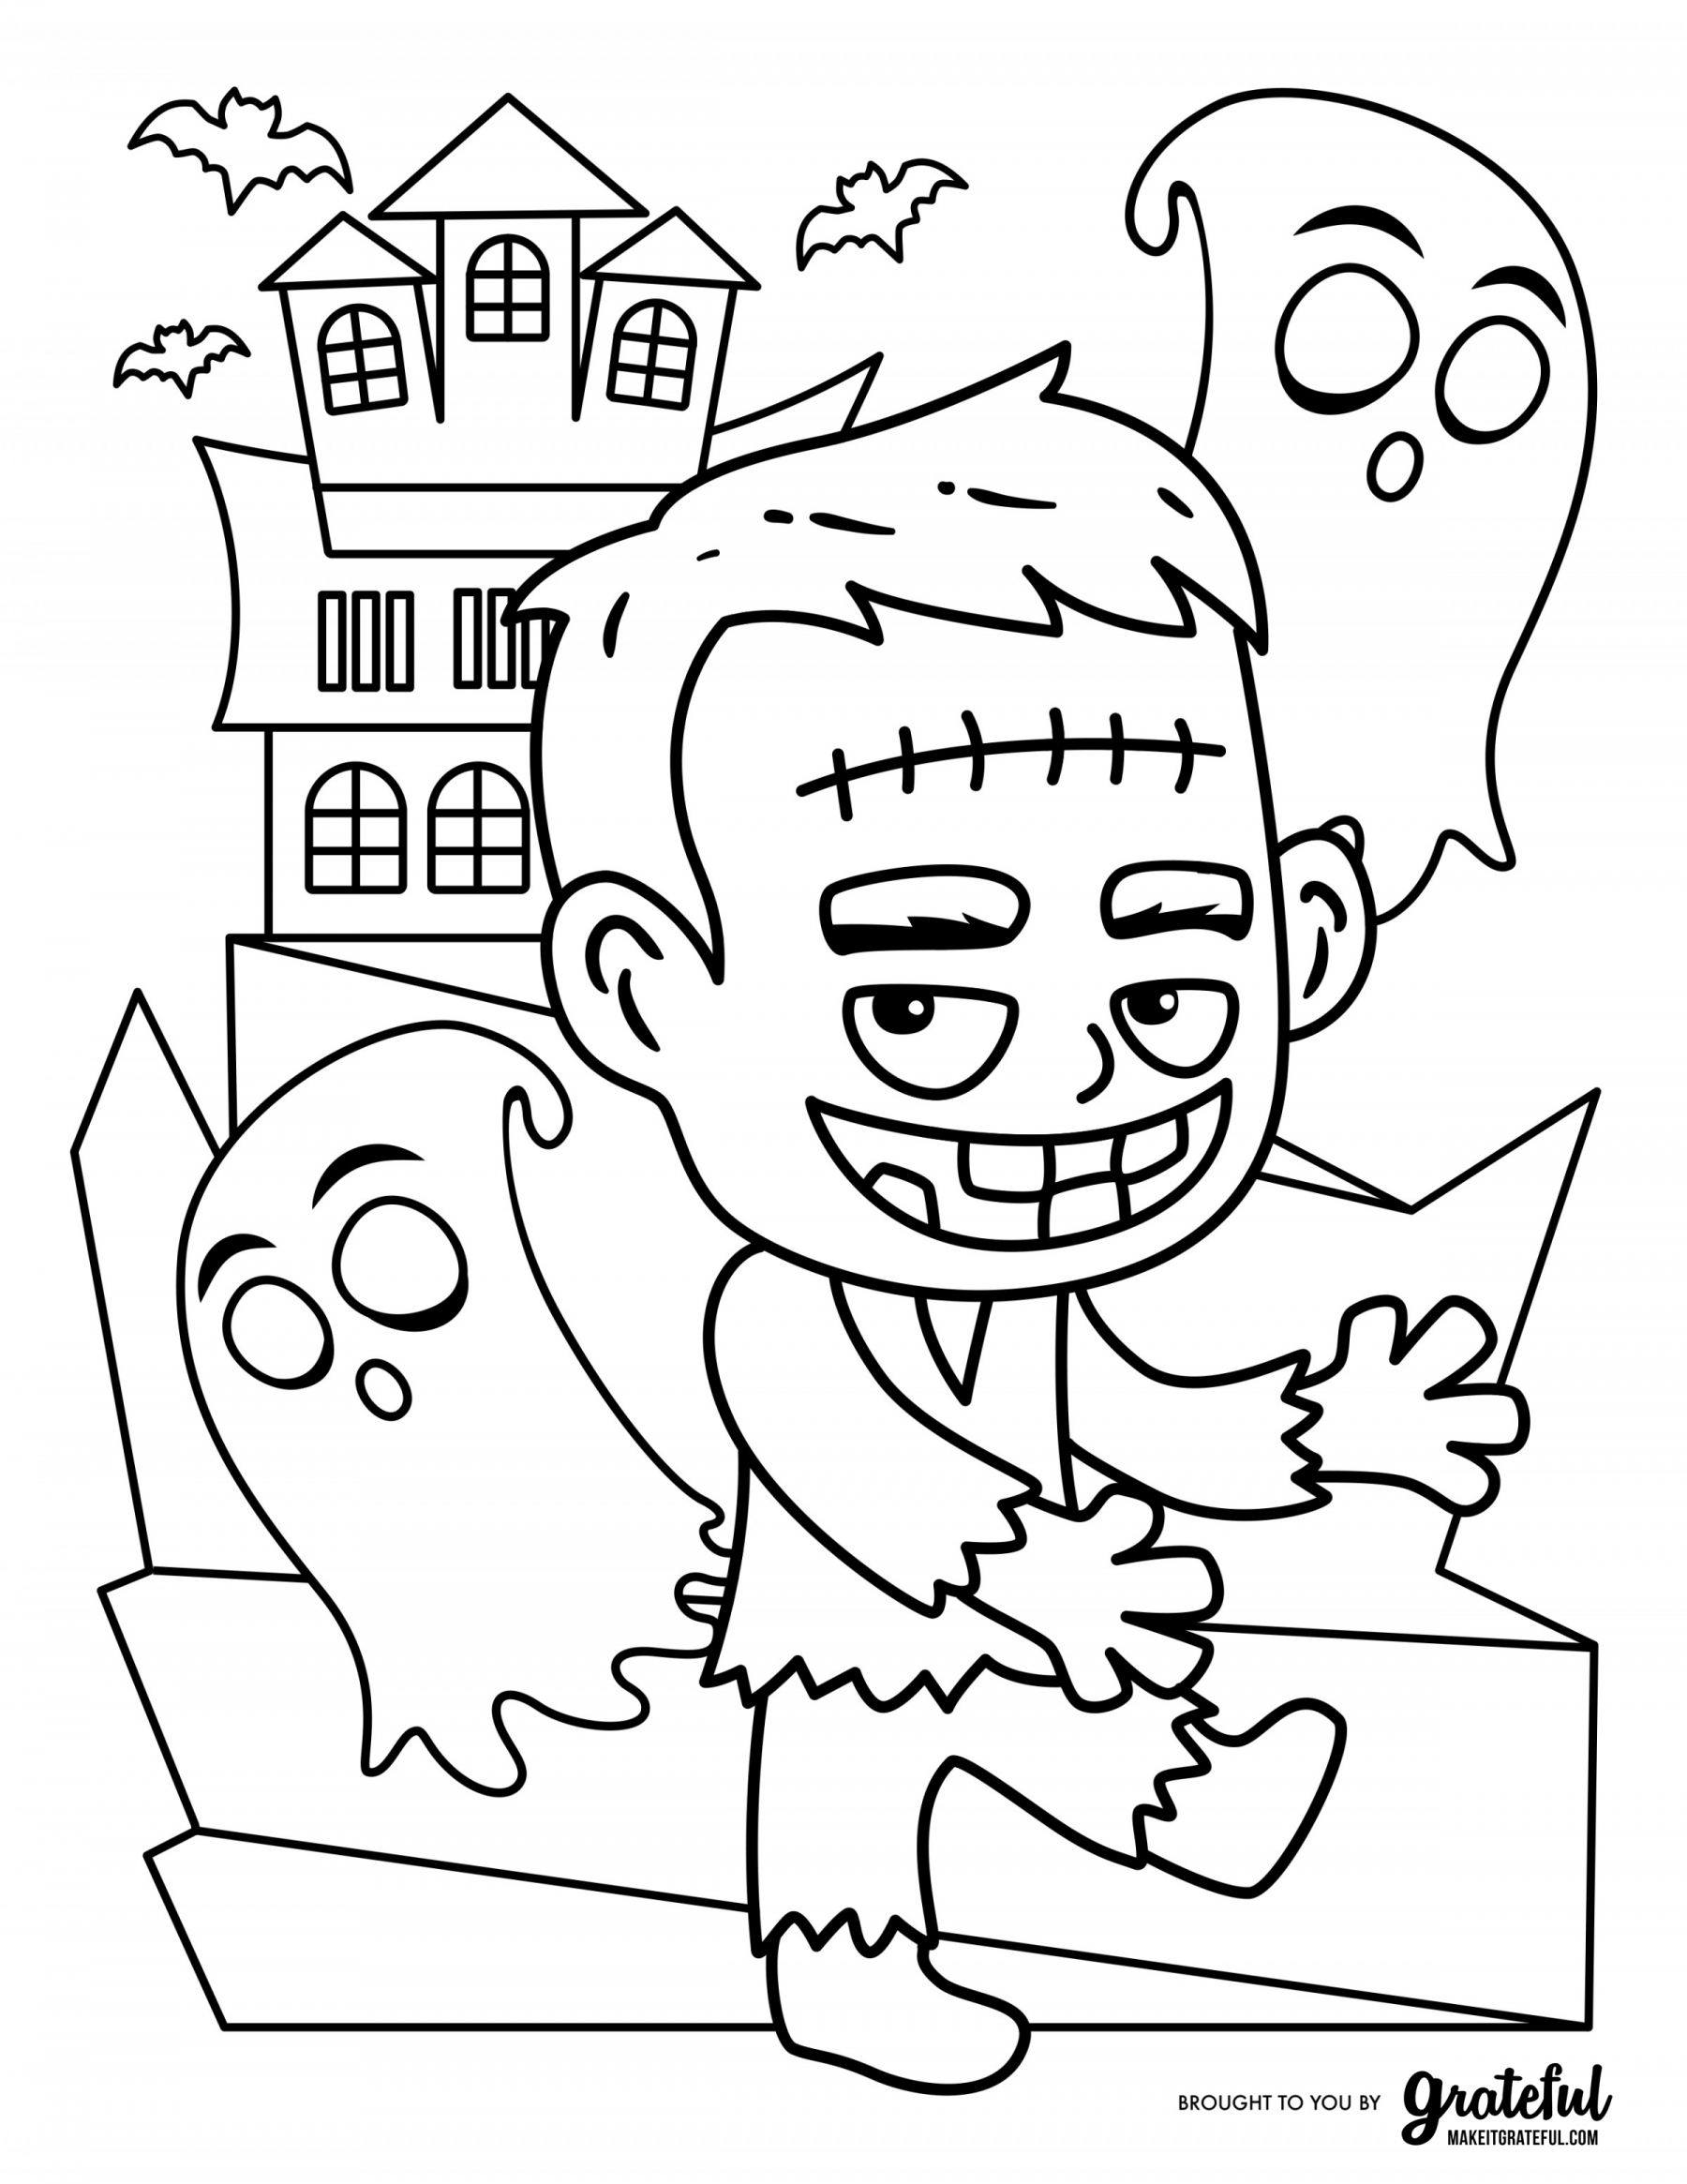 Free Halloween coloring pages for kids or for the kid in you